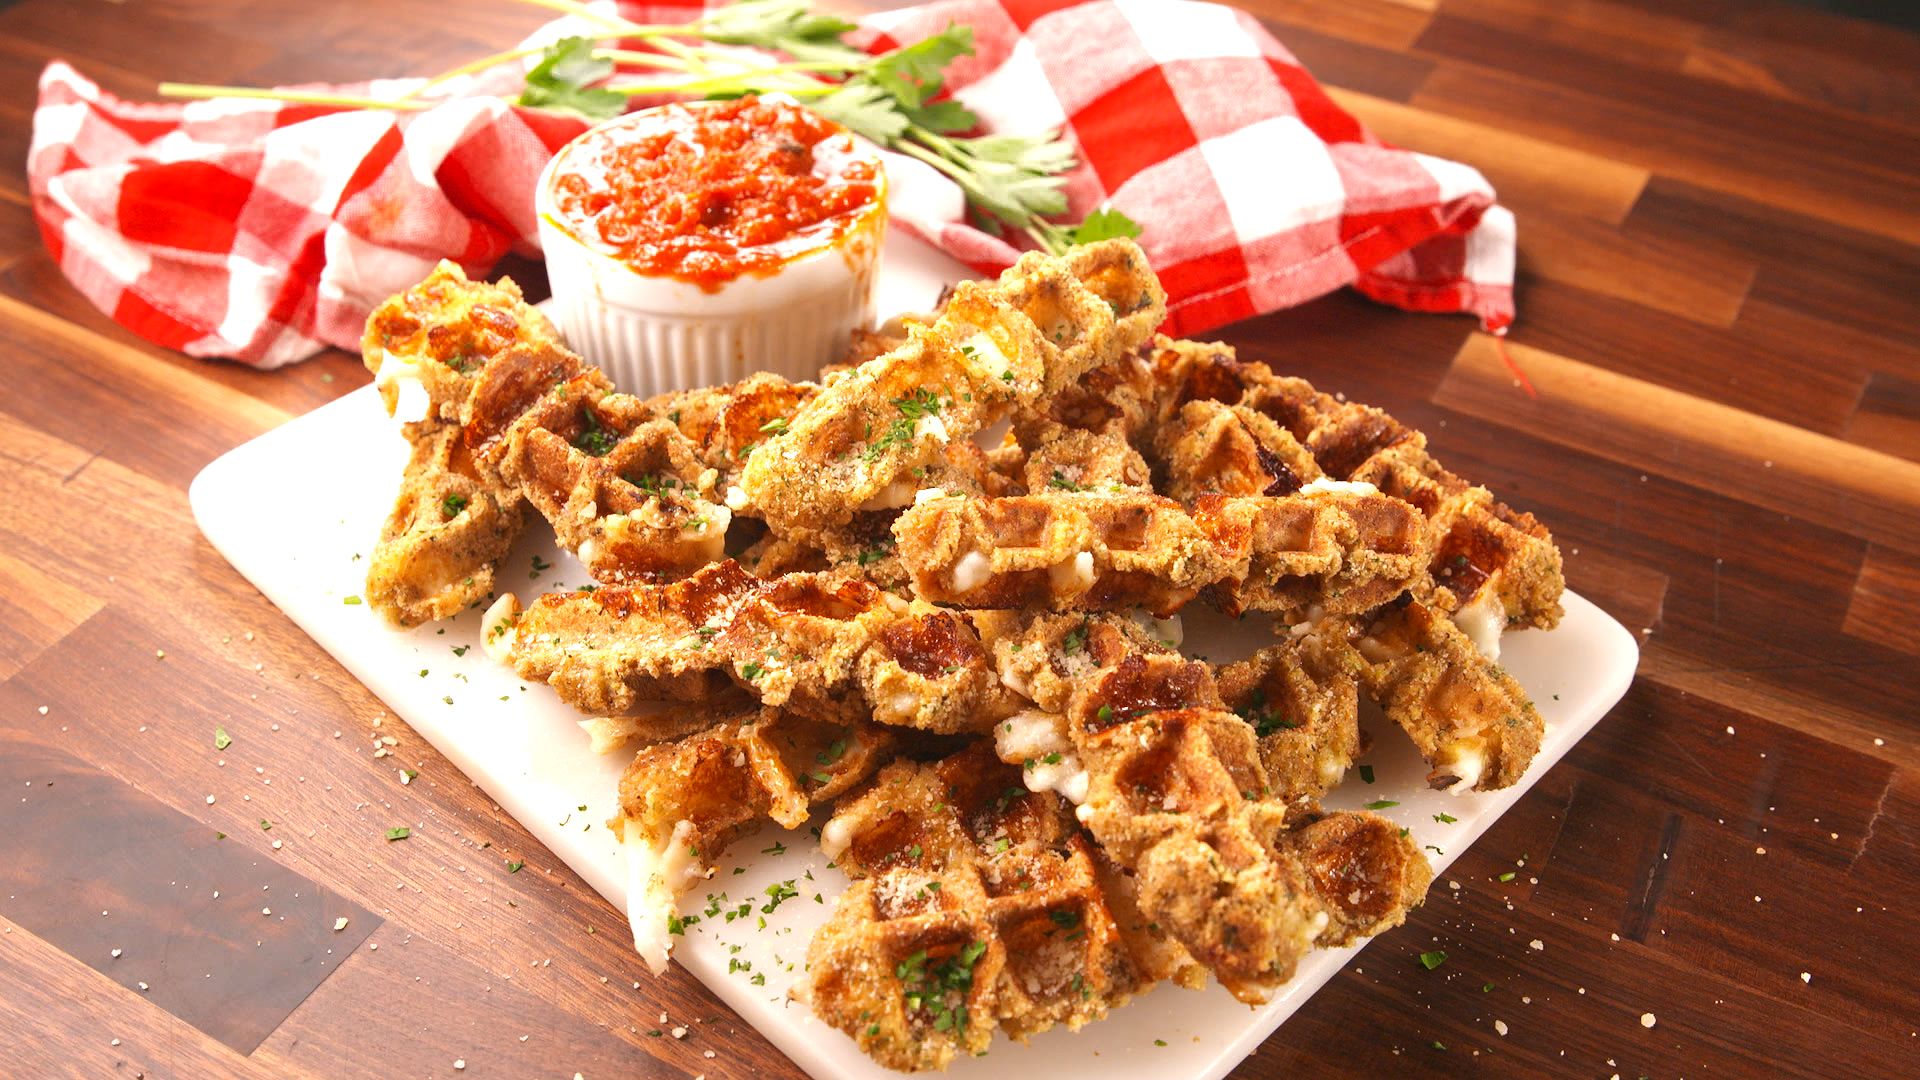 Mozzarella Sticks and Waffle Irons: A Match Made in Heaven